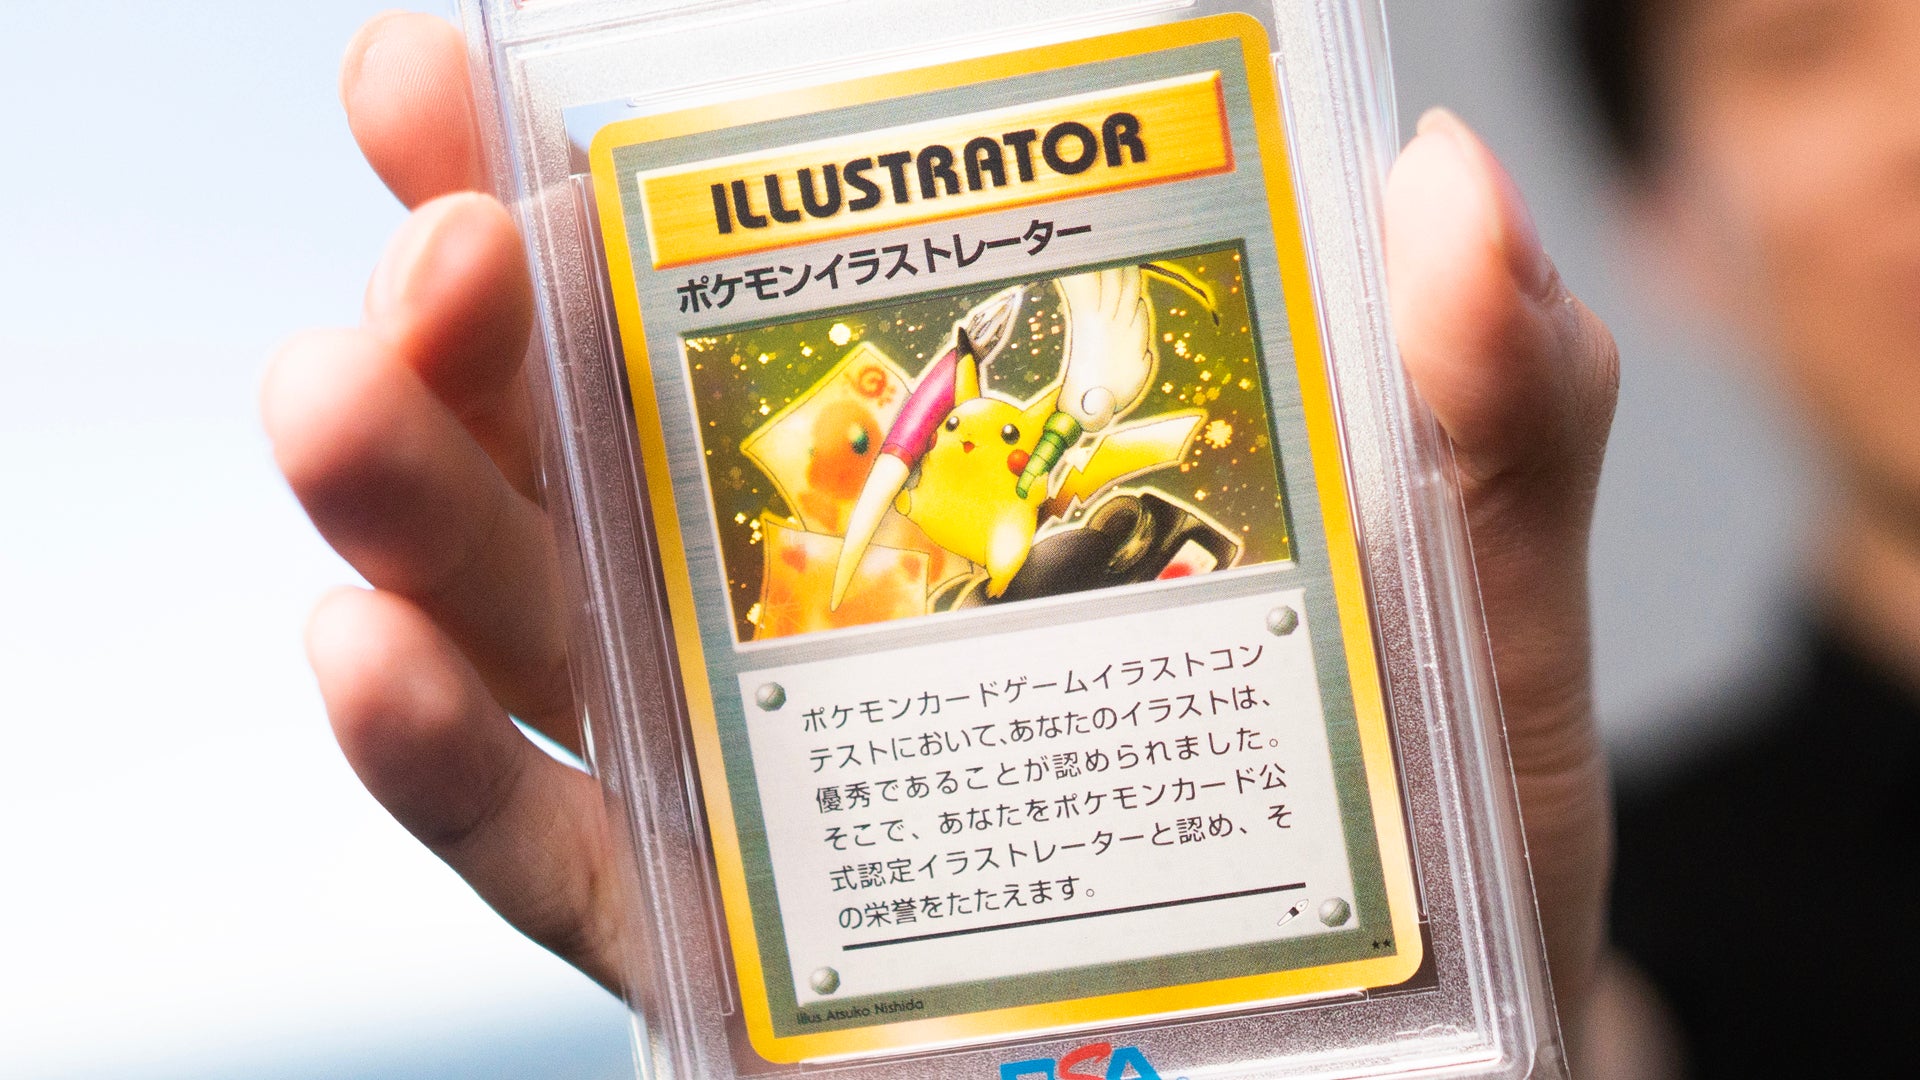 Image for World’s most valuable Pokémon card, Pikachu Illustrator, appears at auction for almost half a million dollars